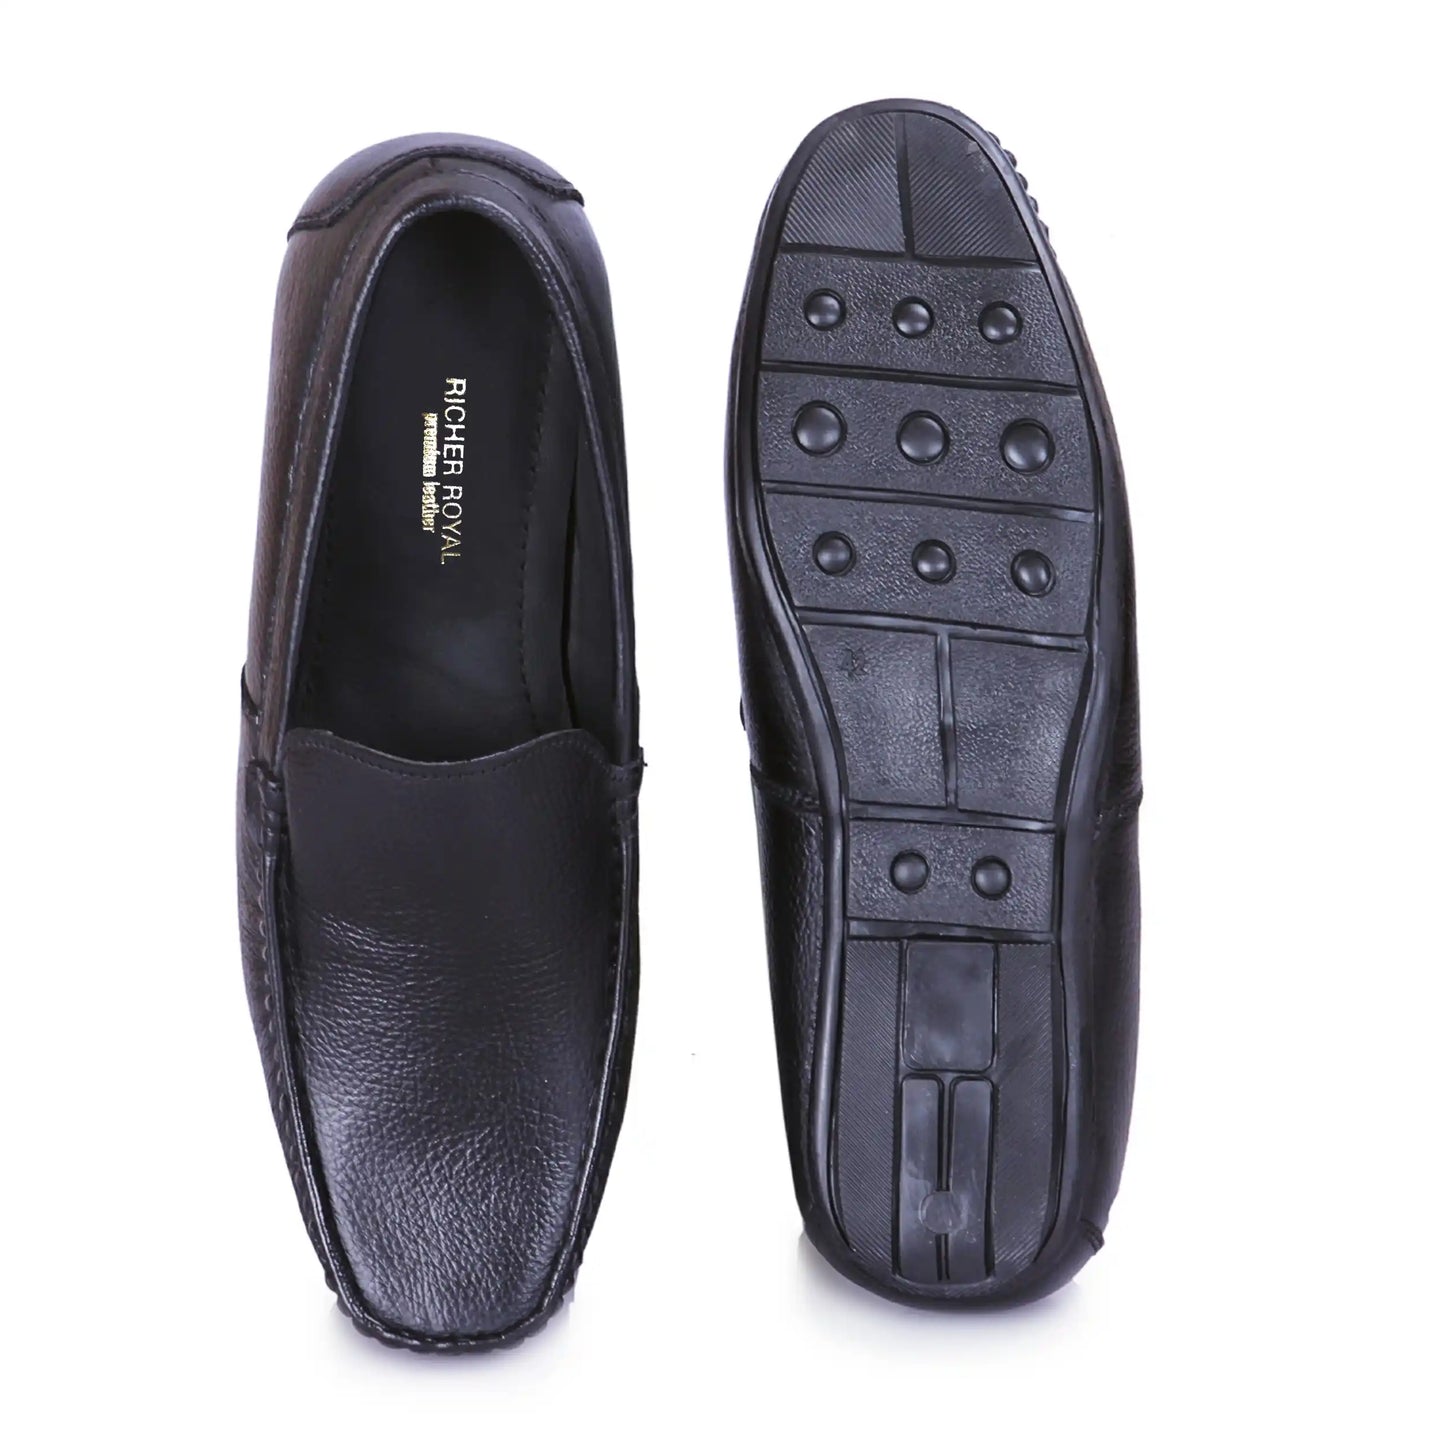 Genuine Leather Loafers for Men Slip On Shoes